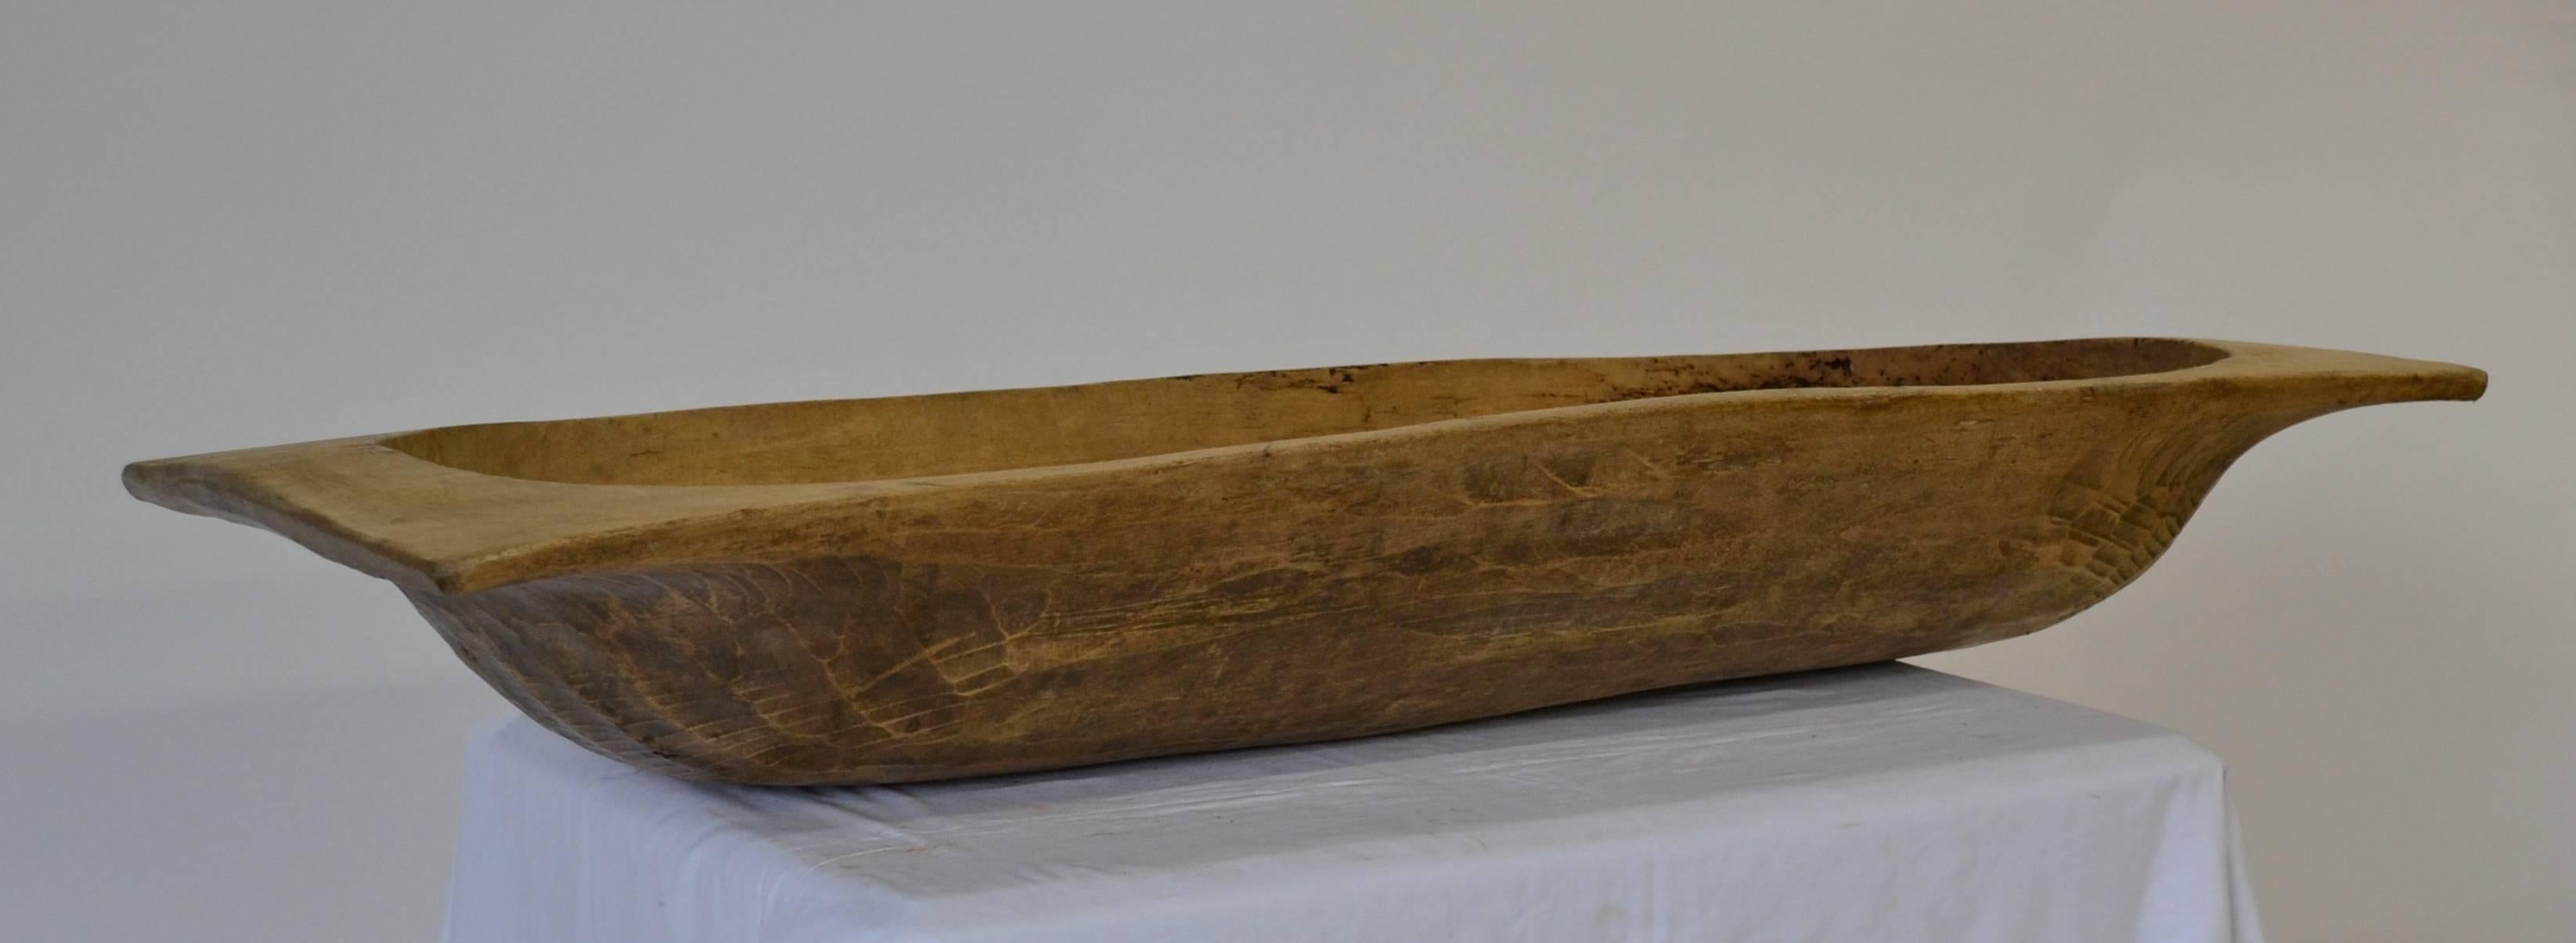 A large attractive antique dough bowl or trog, hand-carved from a split log.  Great as a centerpiece or as a catch-all by the door to toss in scarves and gloves, or use for keeping kindling, logs, or magazines by the fire.
This one has a lovely